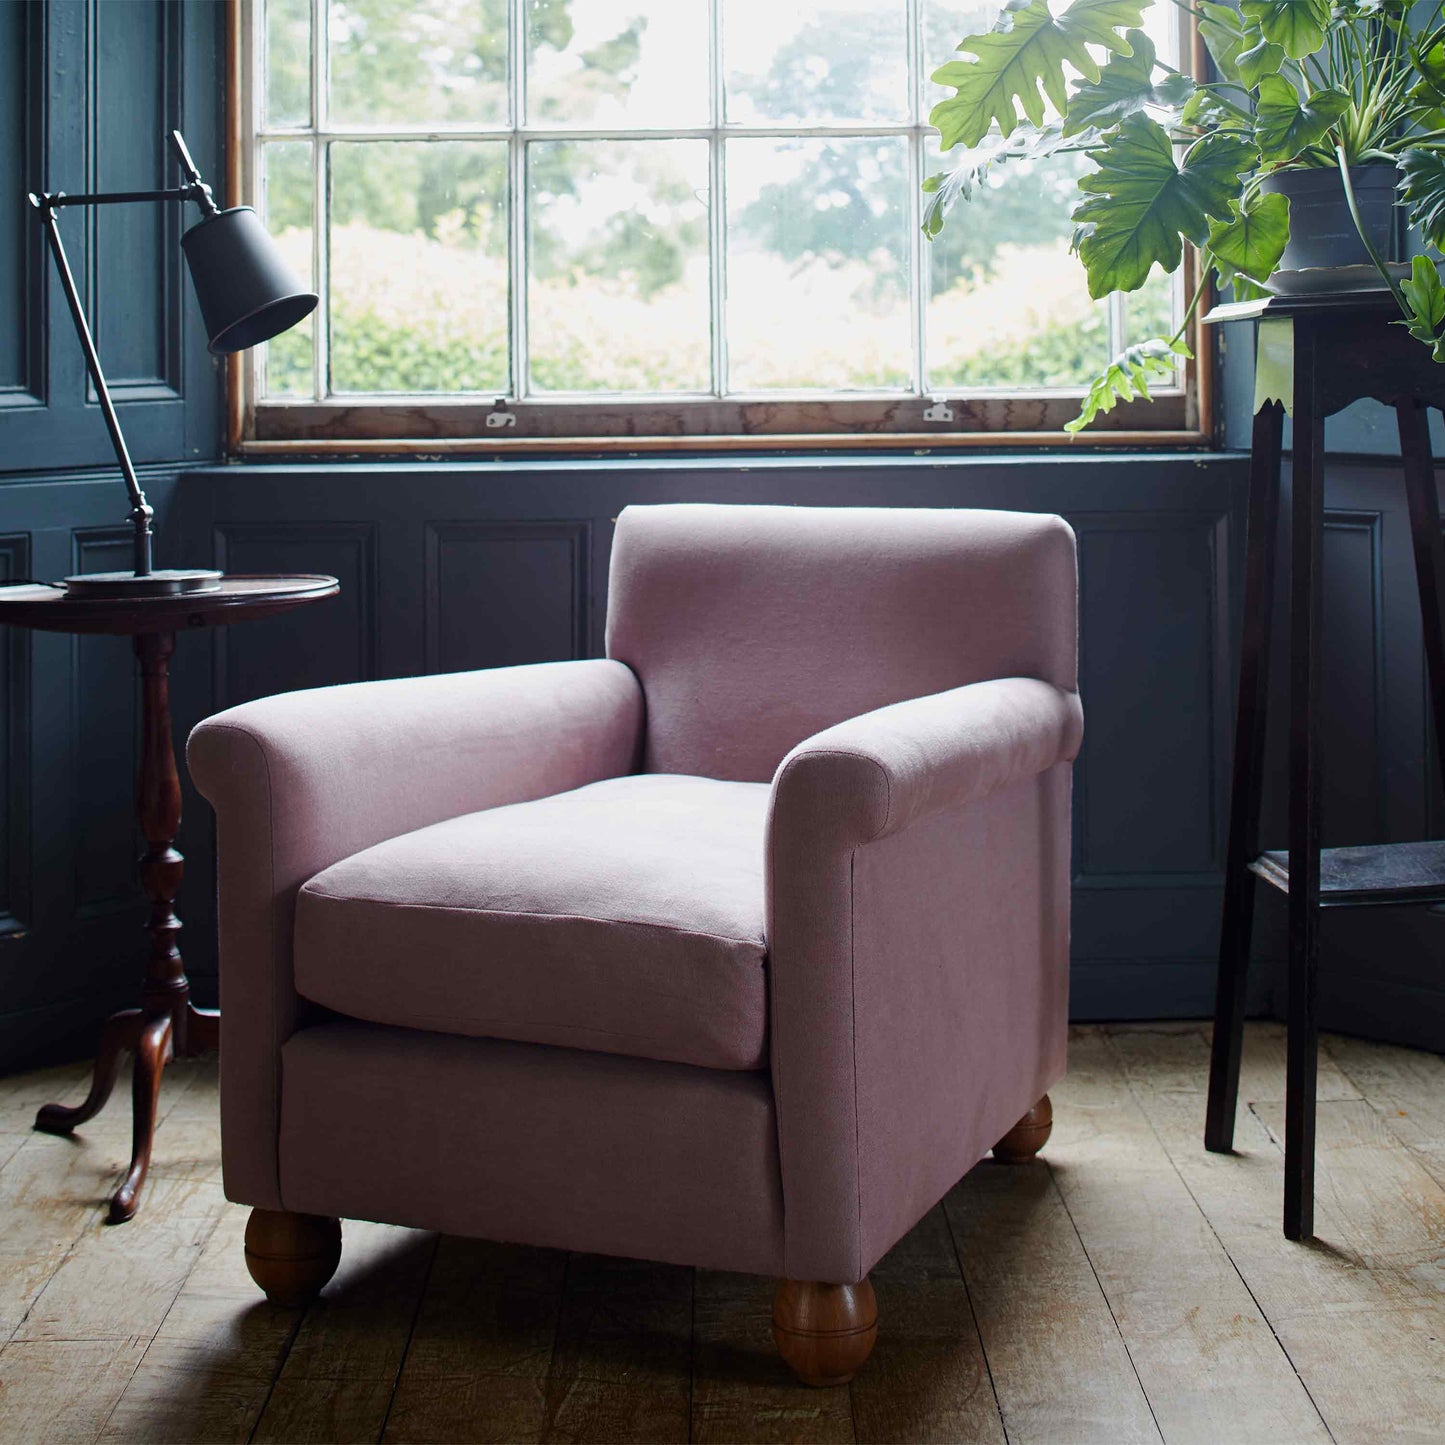 Idler Armchair in Laidback Linen Pearl Grey